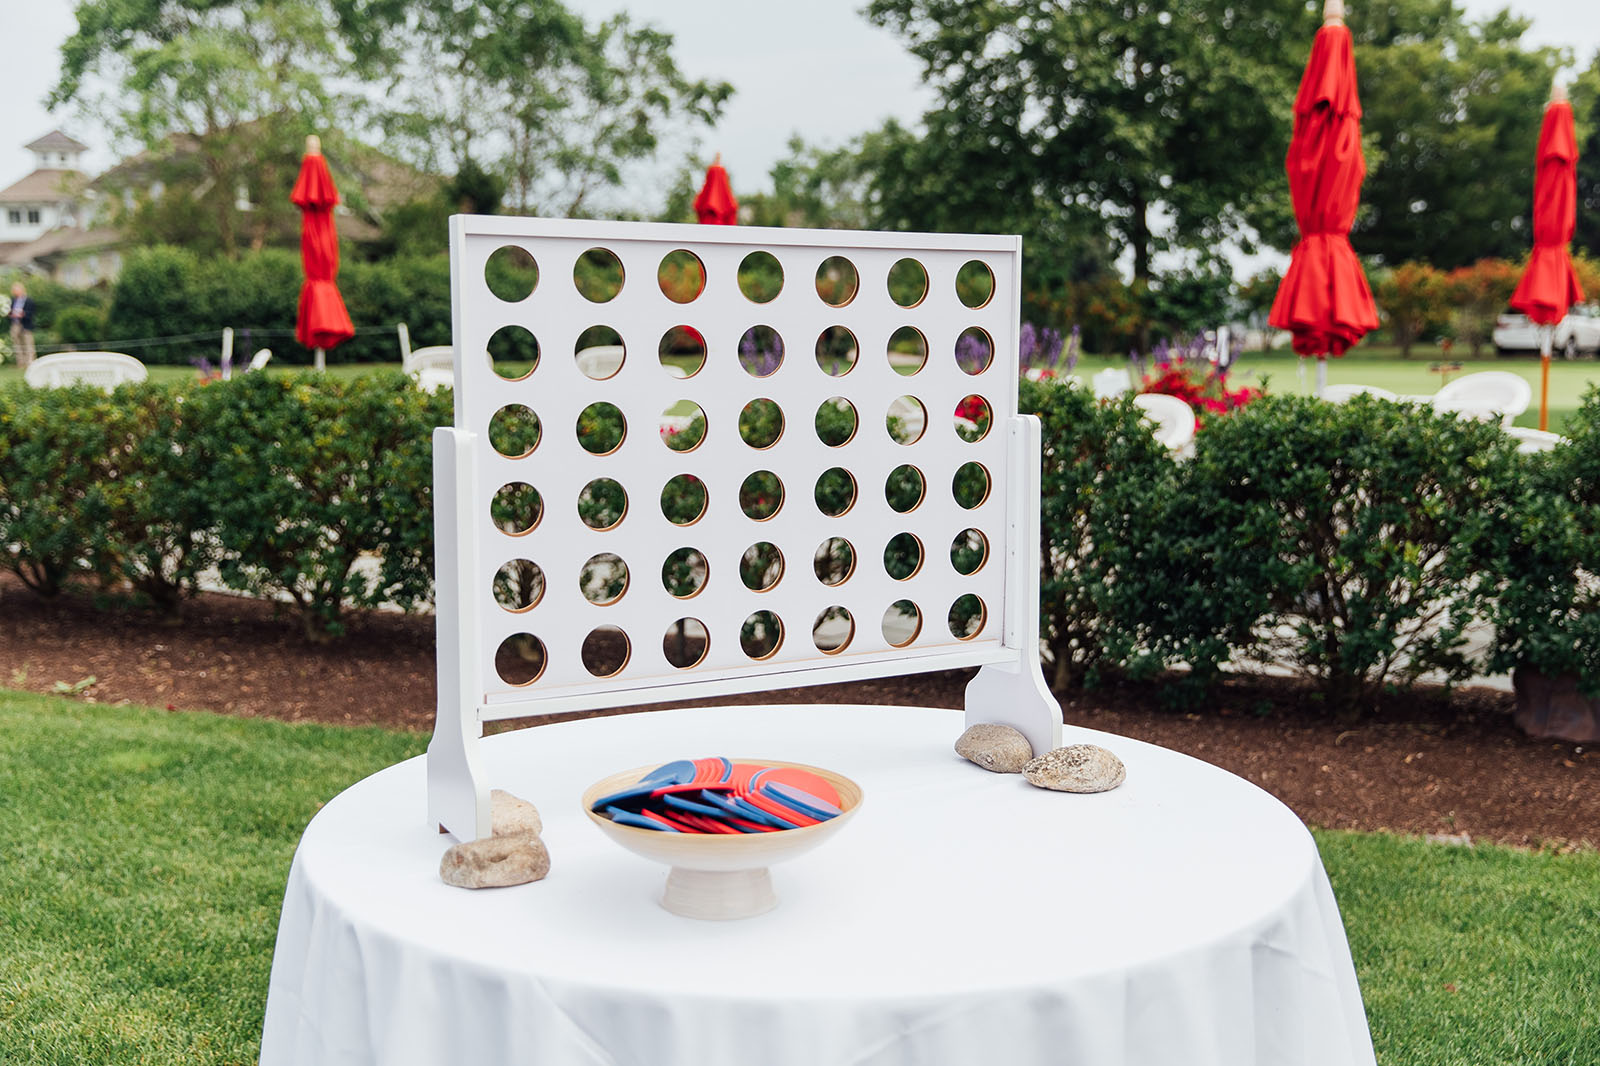 Game of checkers on a table at a wedding cocktail hour